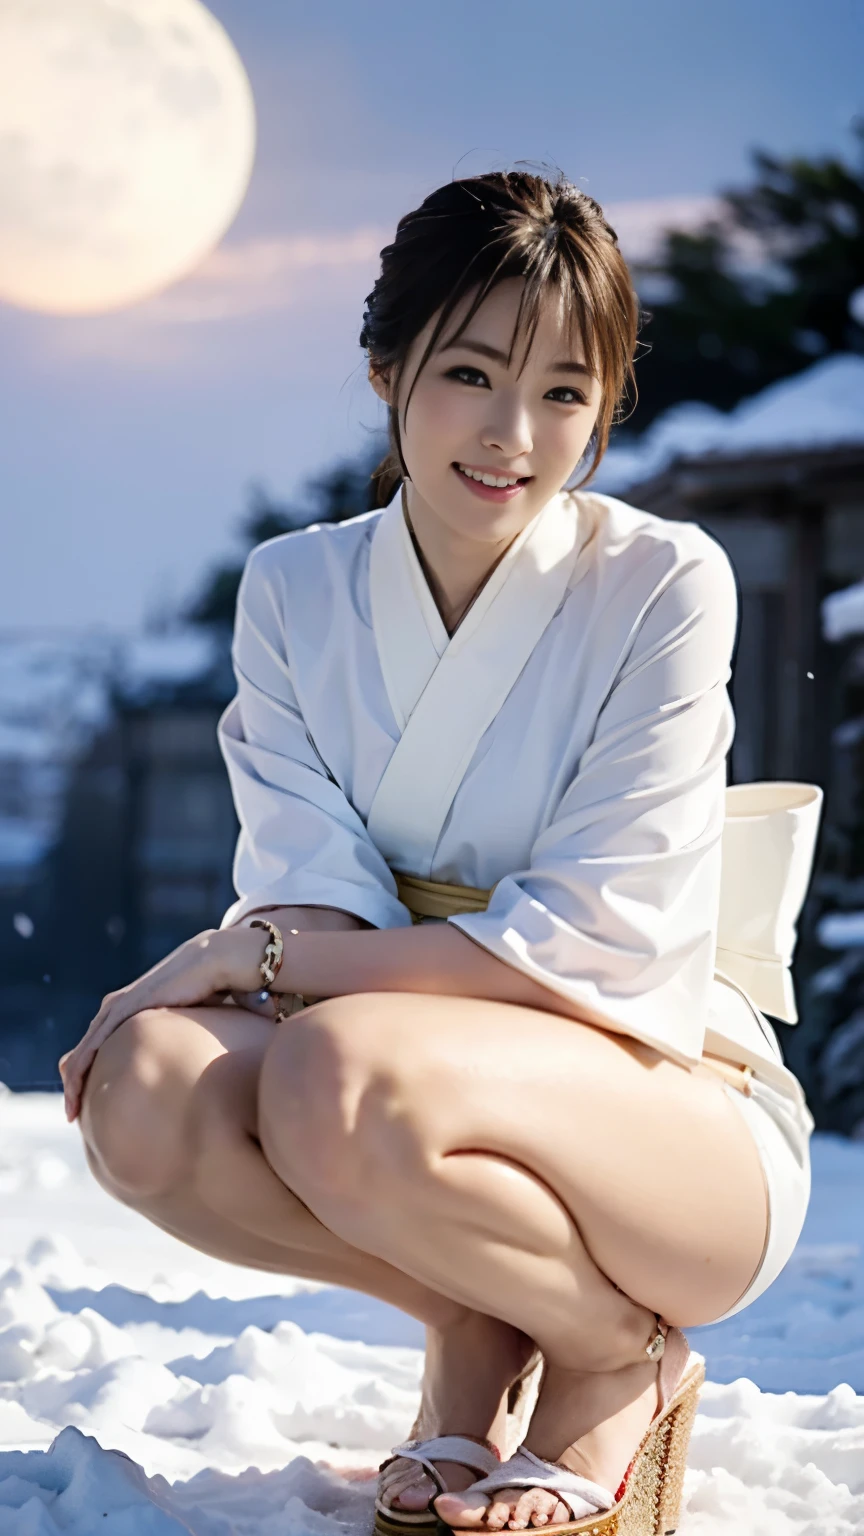 A beautiful woman standing on a snowy mountain at night wearing a pure white thin kimono that shows little skin.,(((In the moonlight of a blizzard, a snow woman looking good in a plain white kimono is squatting down, staring at me.))),Full body shot from a high rear position,best image quality,professional angle of view,Exceptional detail,Super high resolution,realistic:1.4),high detail,focus on details,1girl concentrated in high concentration,long hair,delicate and beautiful face,white small string bikini,Long limbs and slim waist like a model,White Pin Heels,The best smile with raised eyebrows and corners of the mouth,
